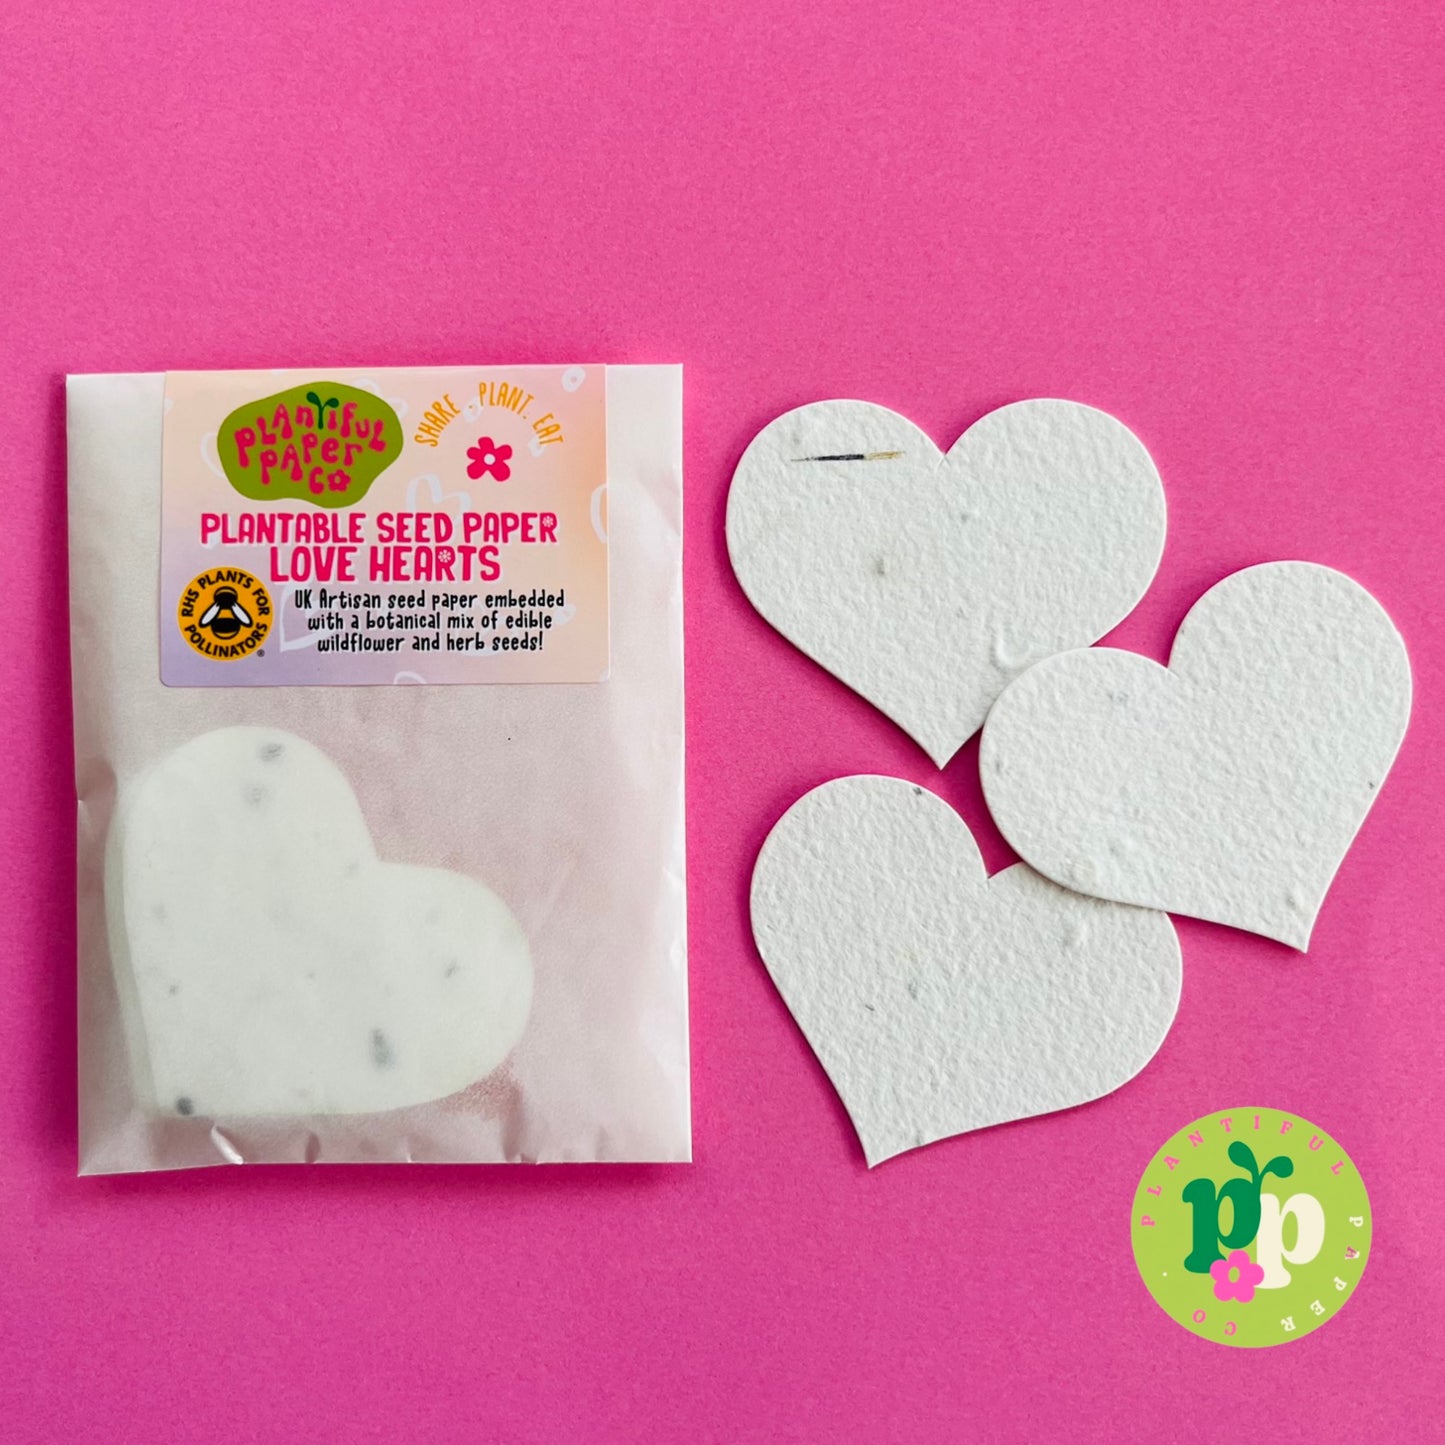 Plantable Seed Paper Love Hearts